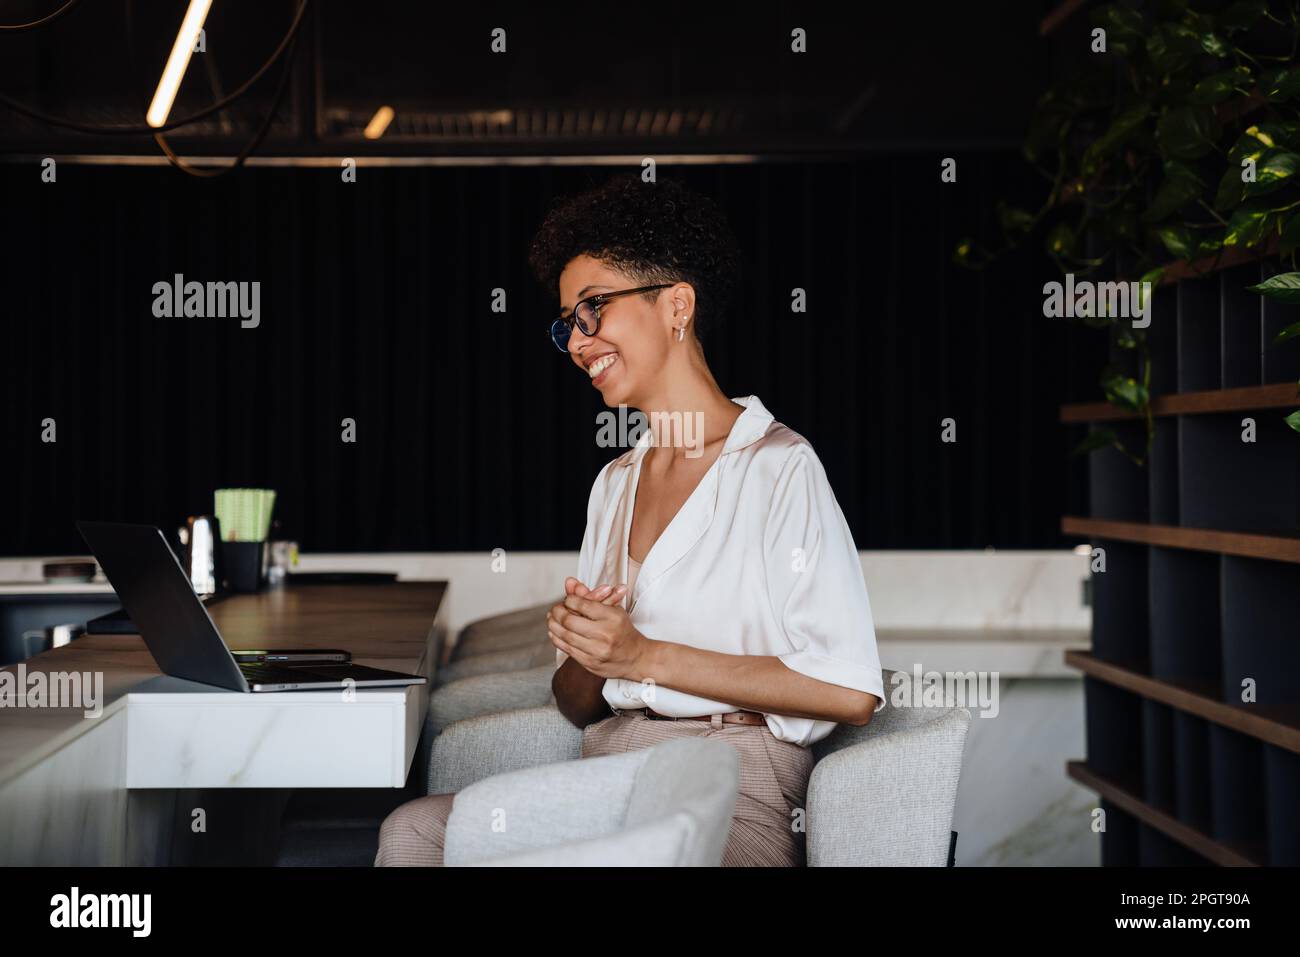 Middle-aged happy businesswoman using laptop while sitting in chair at cafe Stock Photo